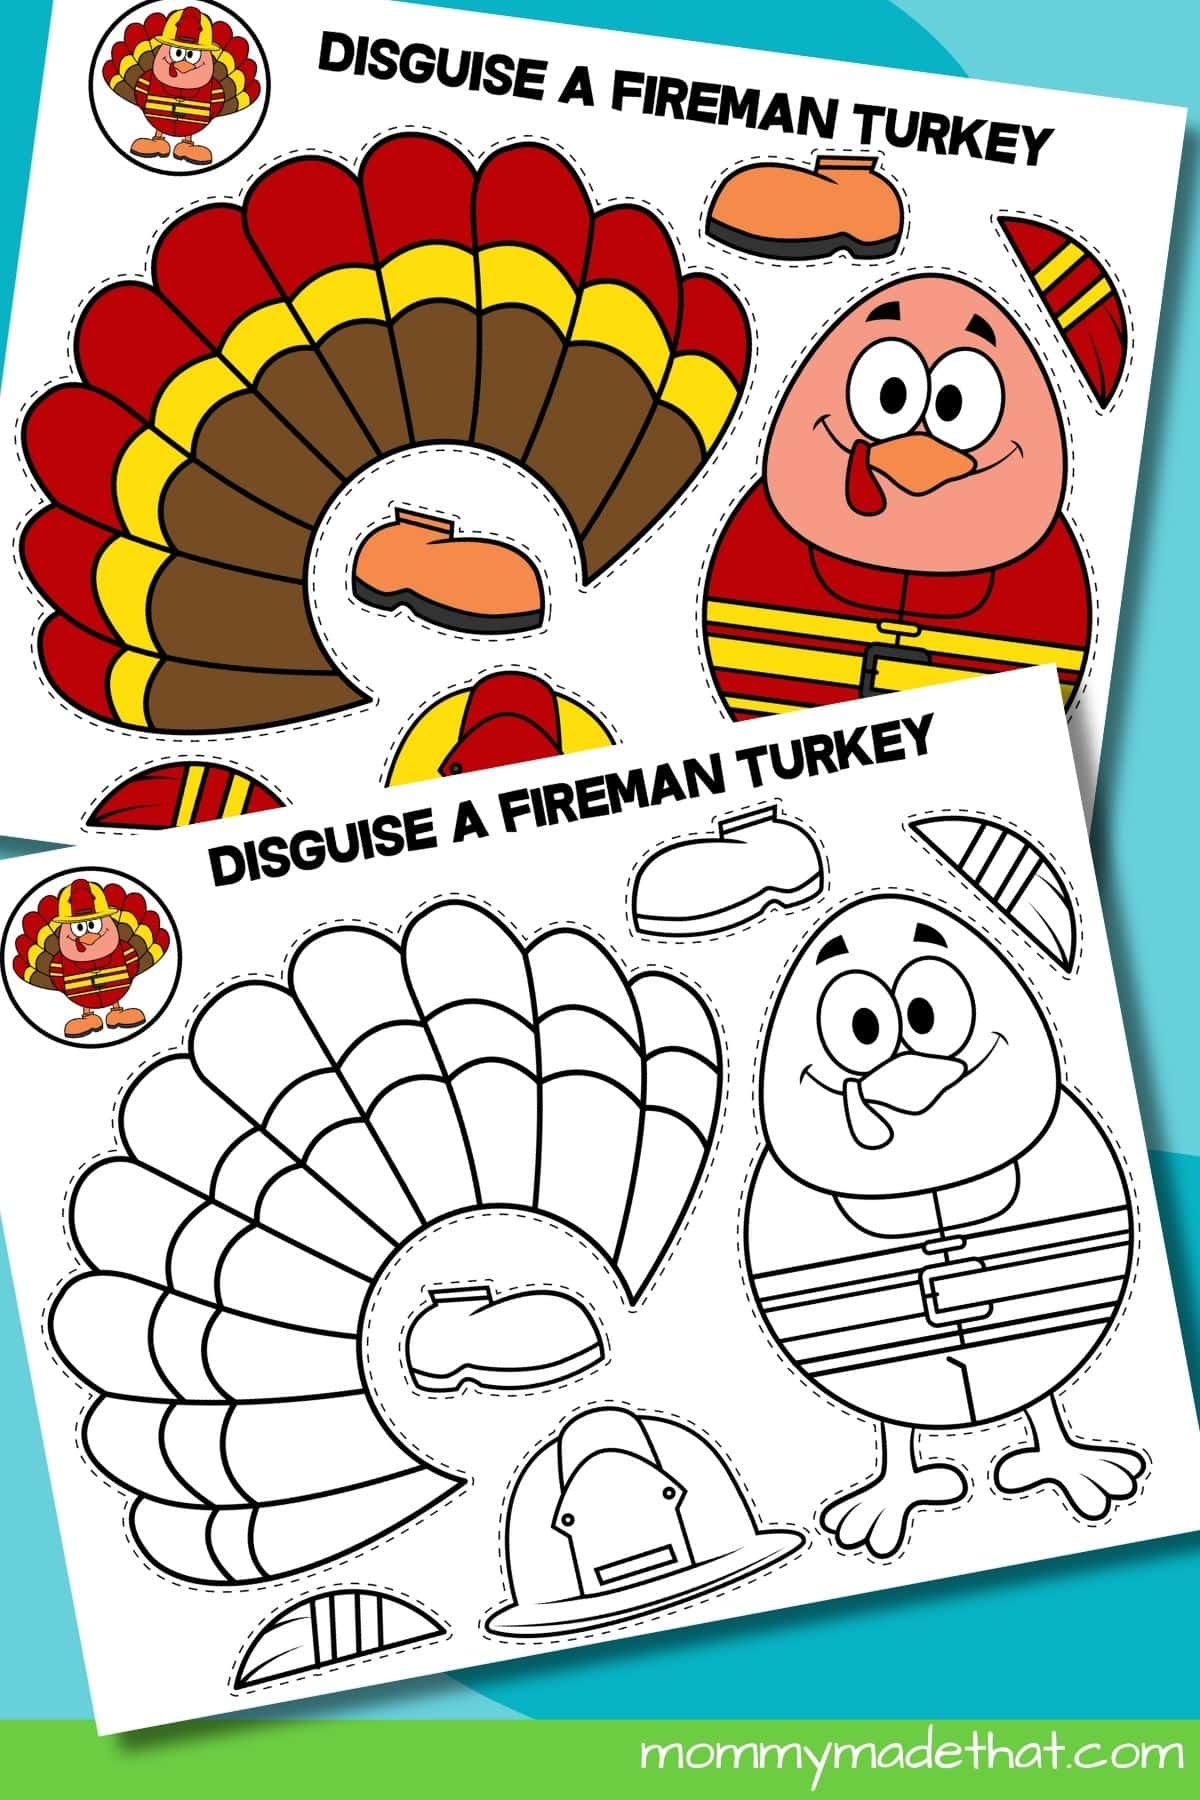 how to disguise a turkey fireman